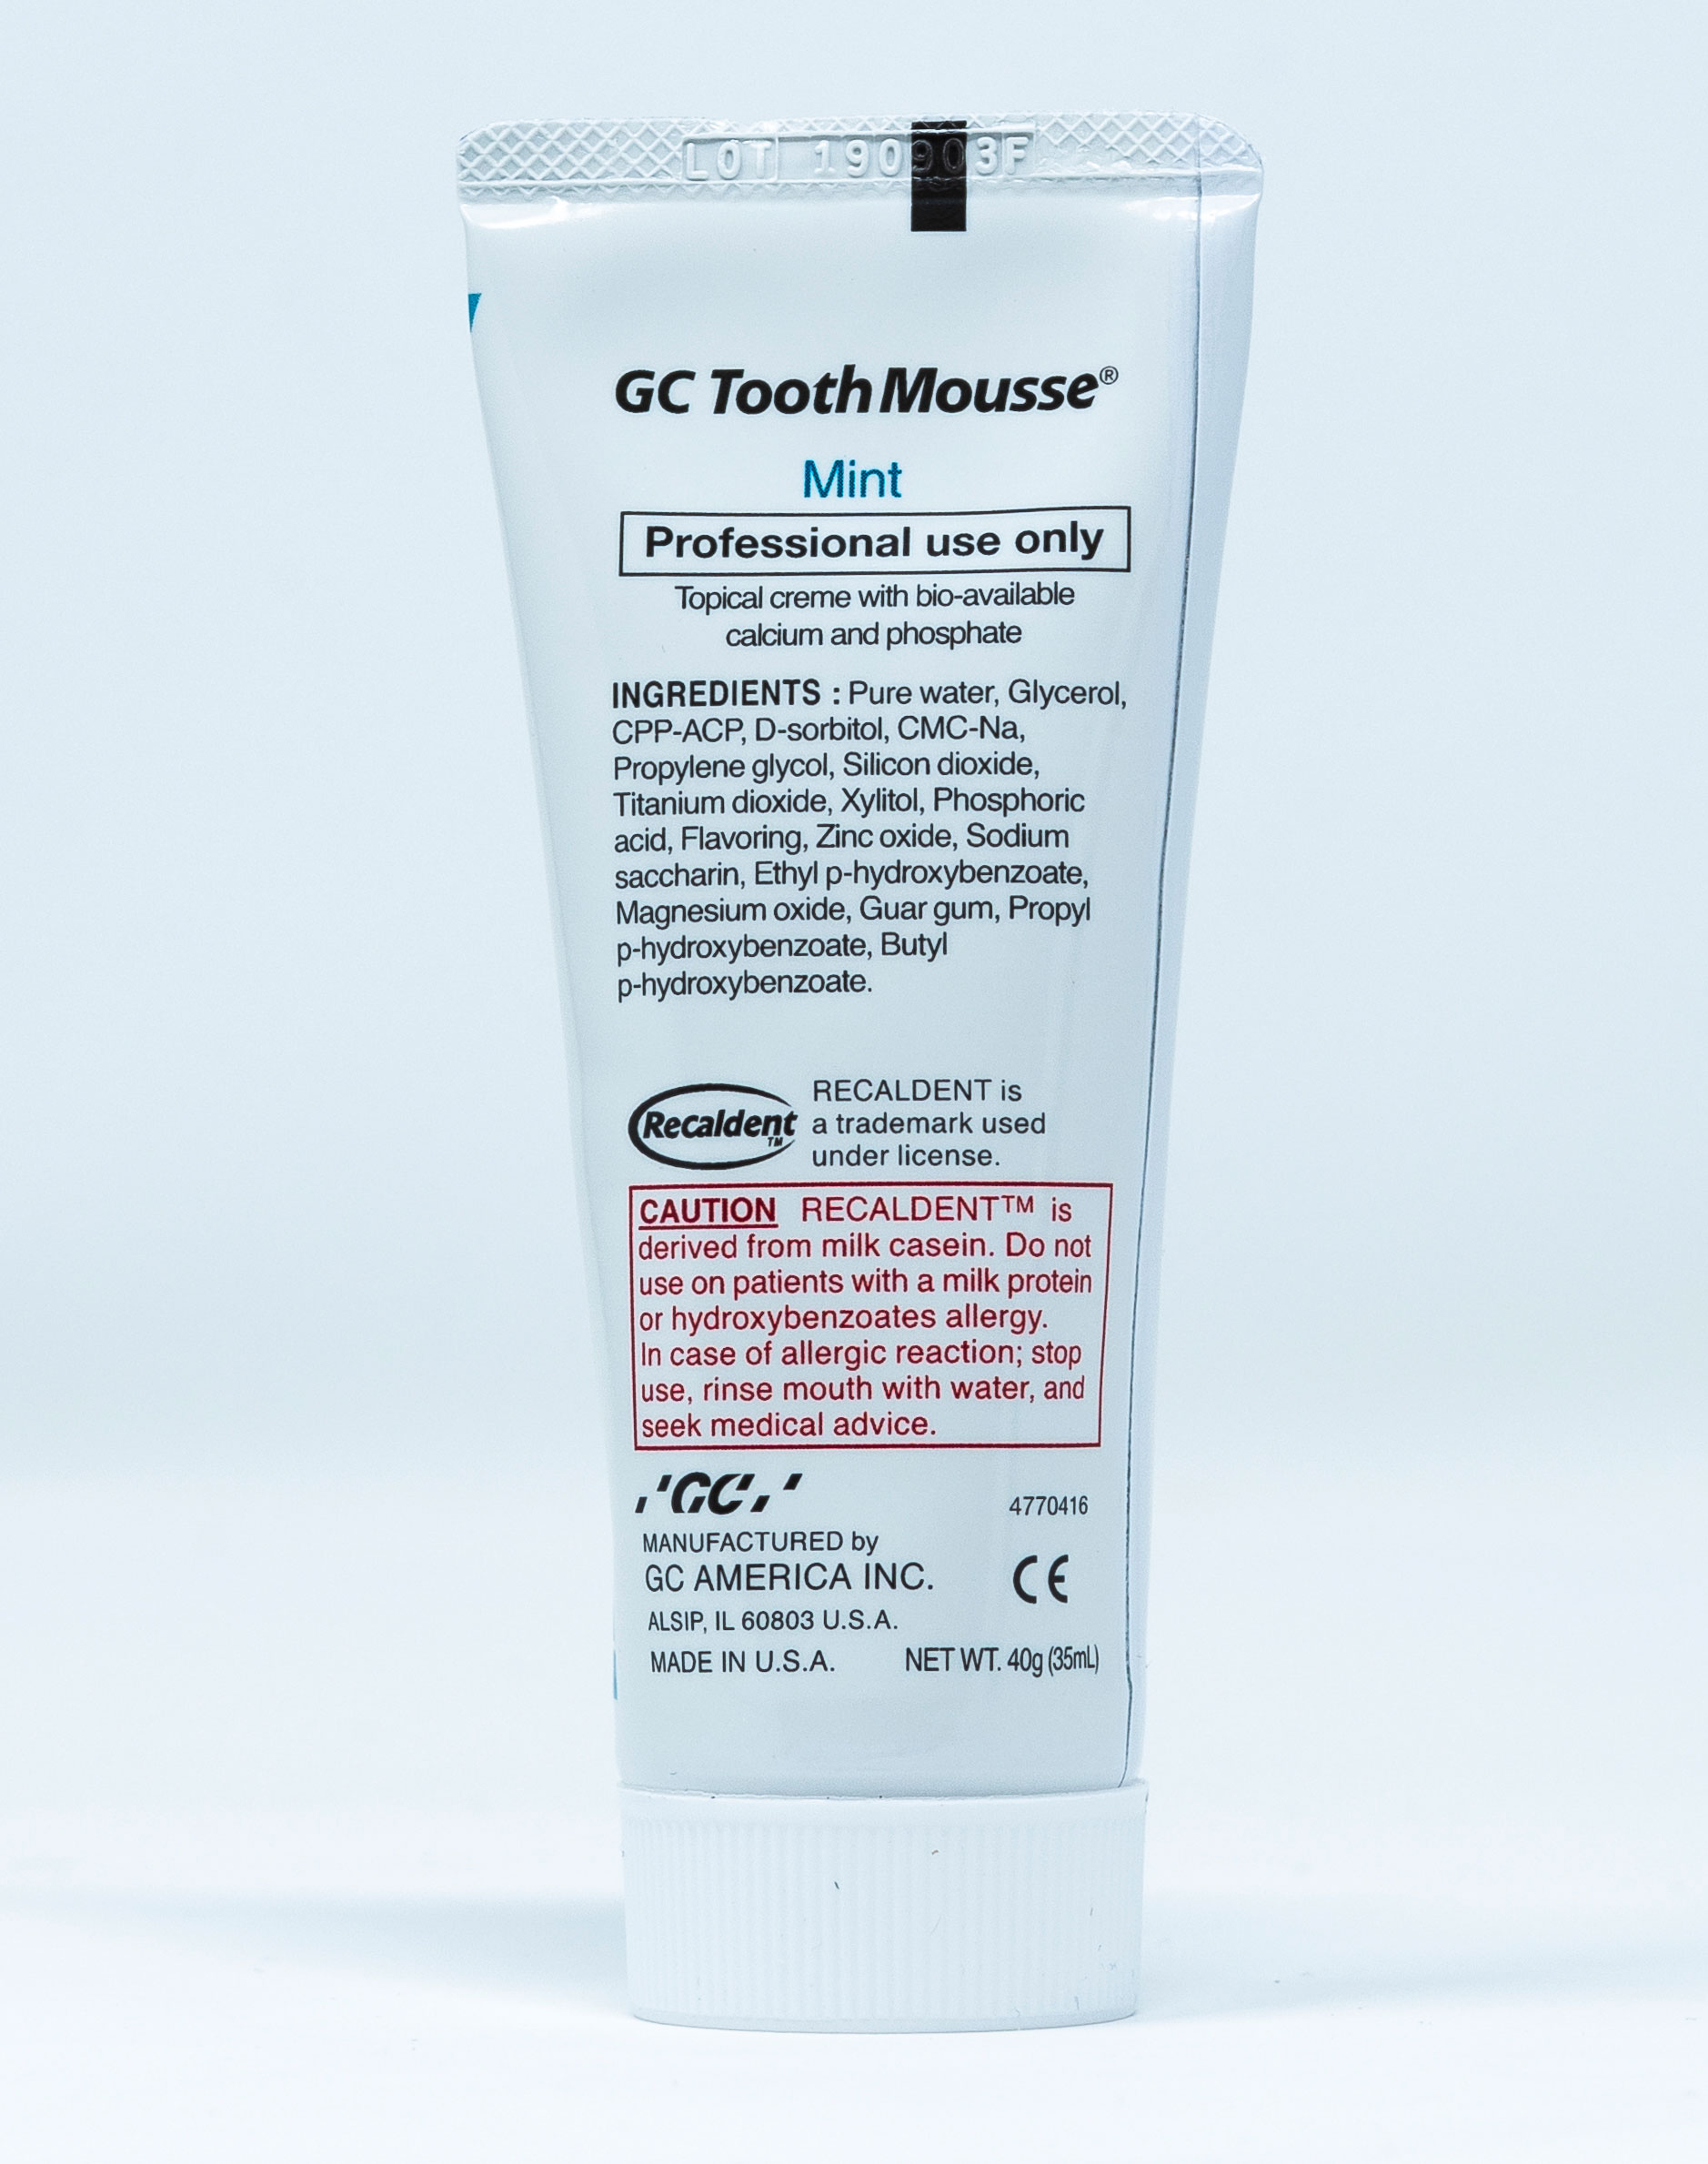 GC Crema Remineralizzante Tooth Mousse Menta - 40 g